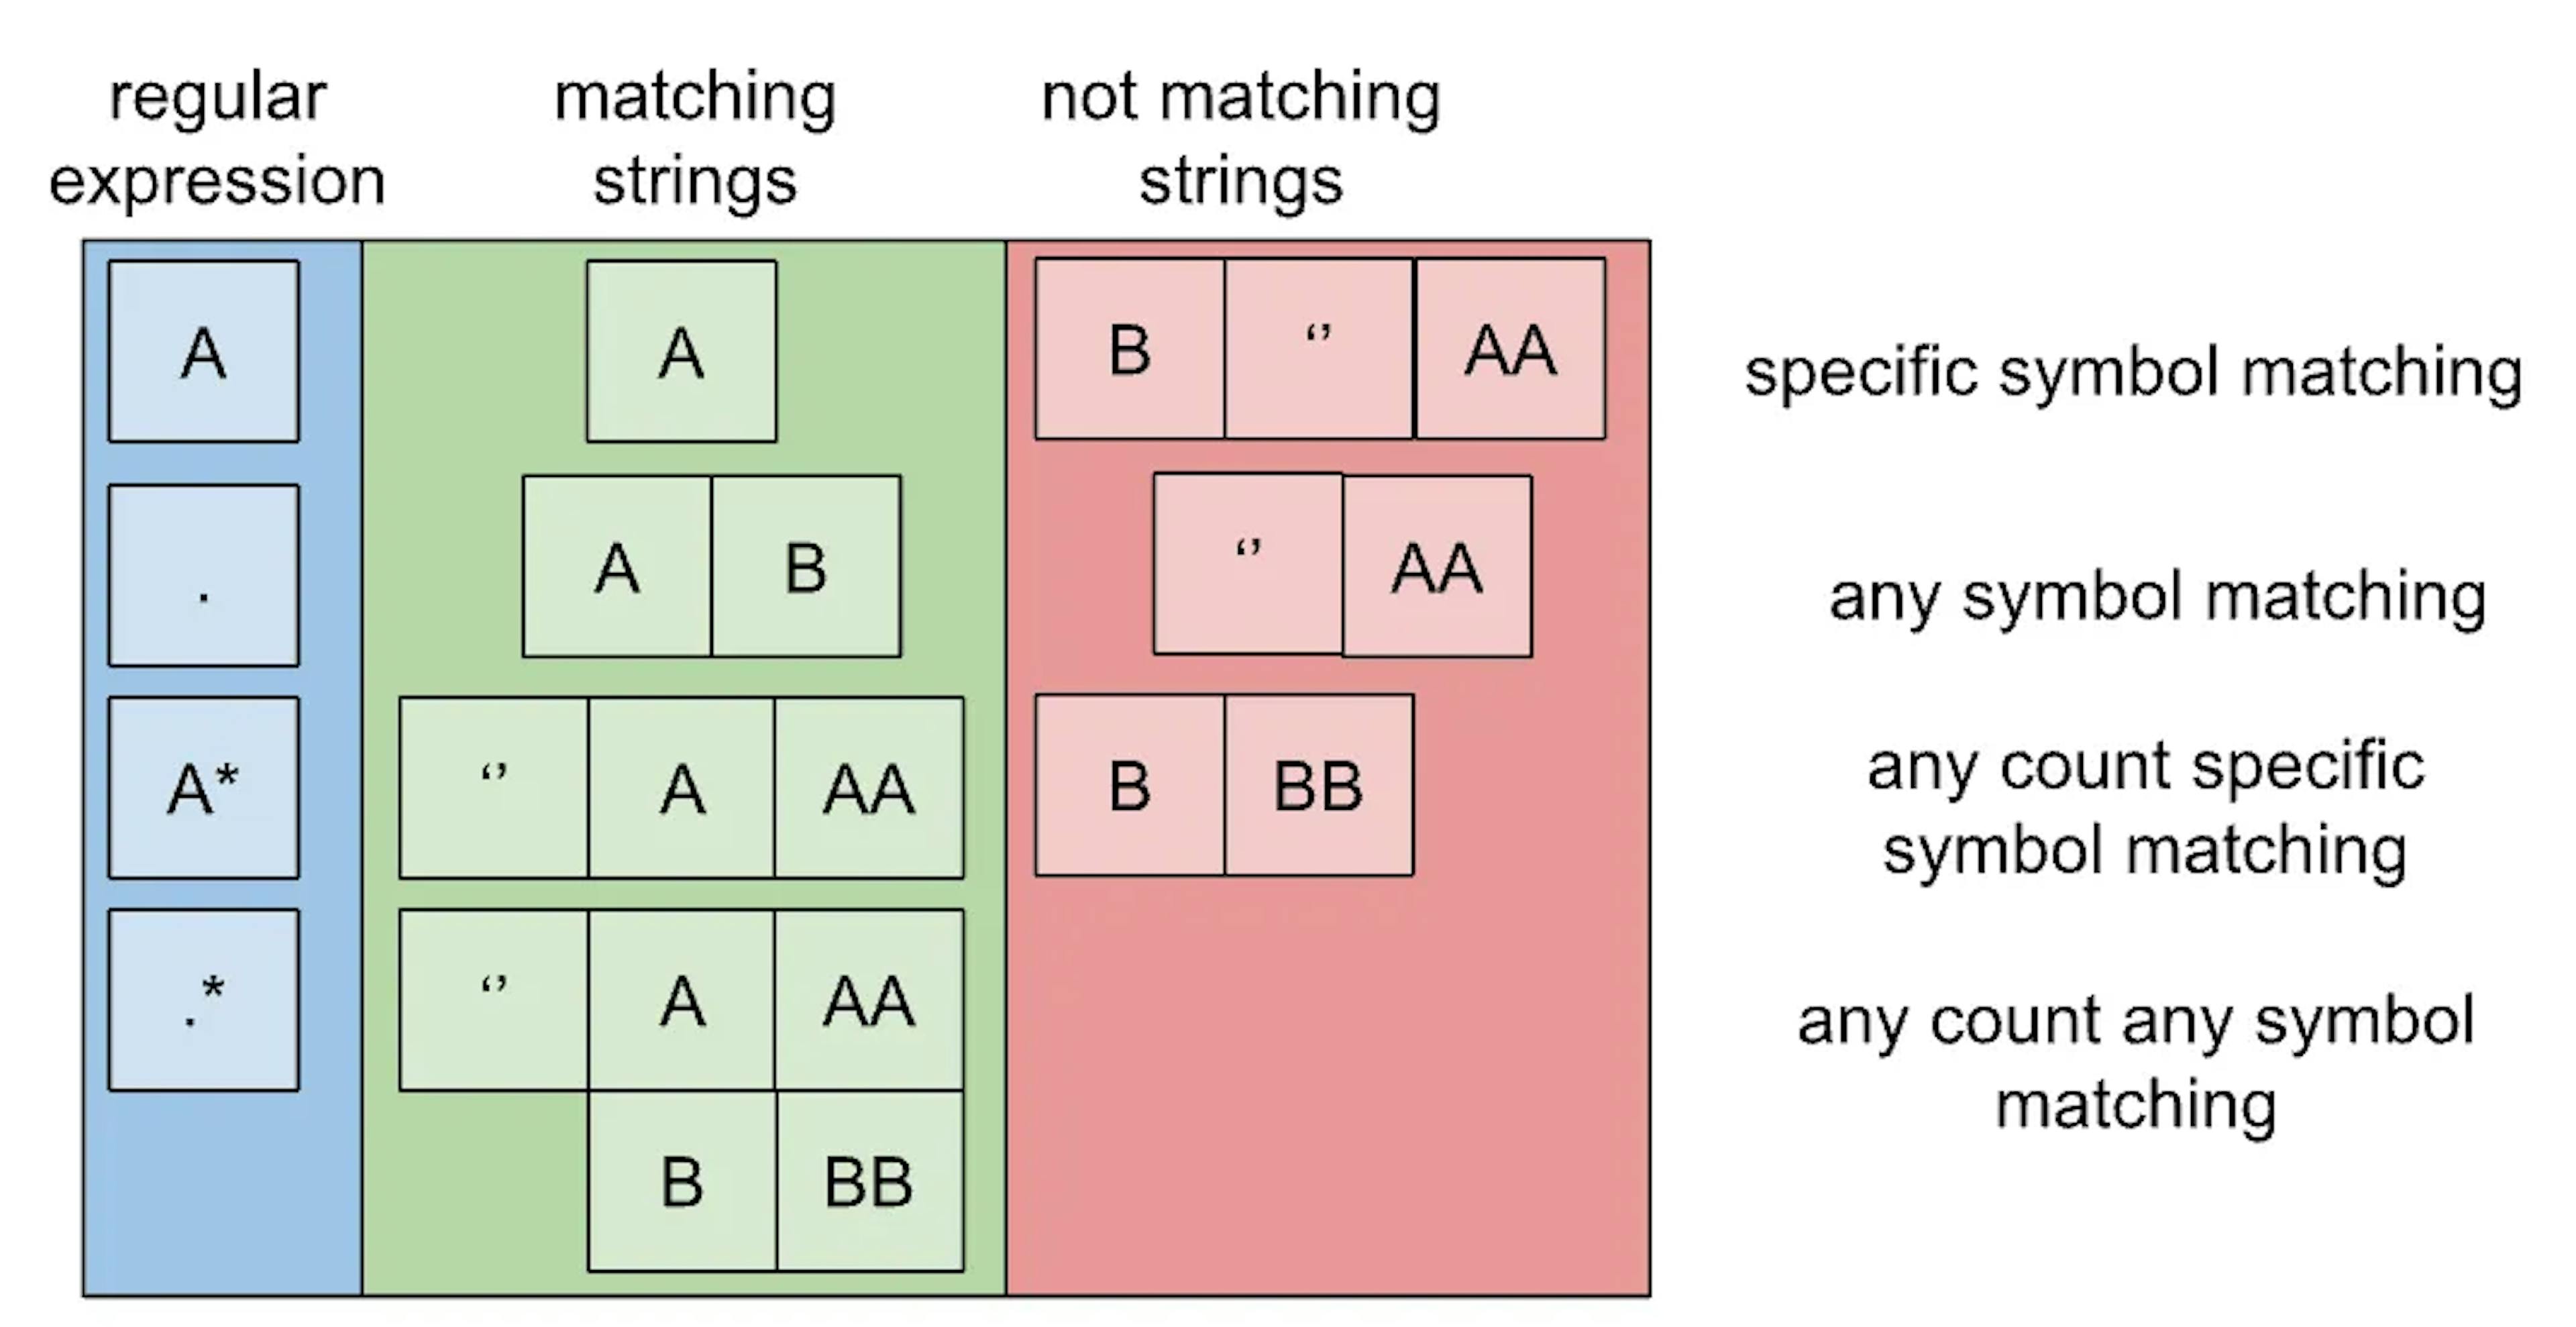 Picture 1. Simplest regular expression matching